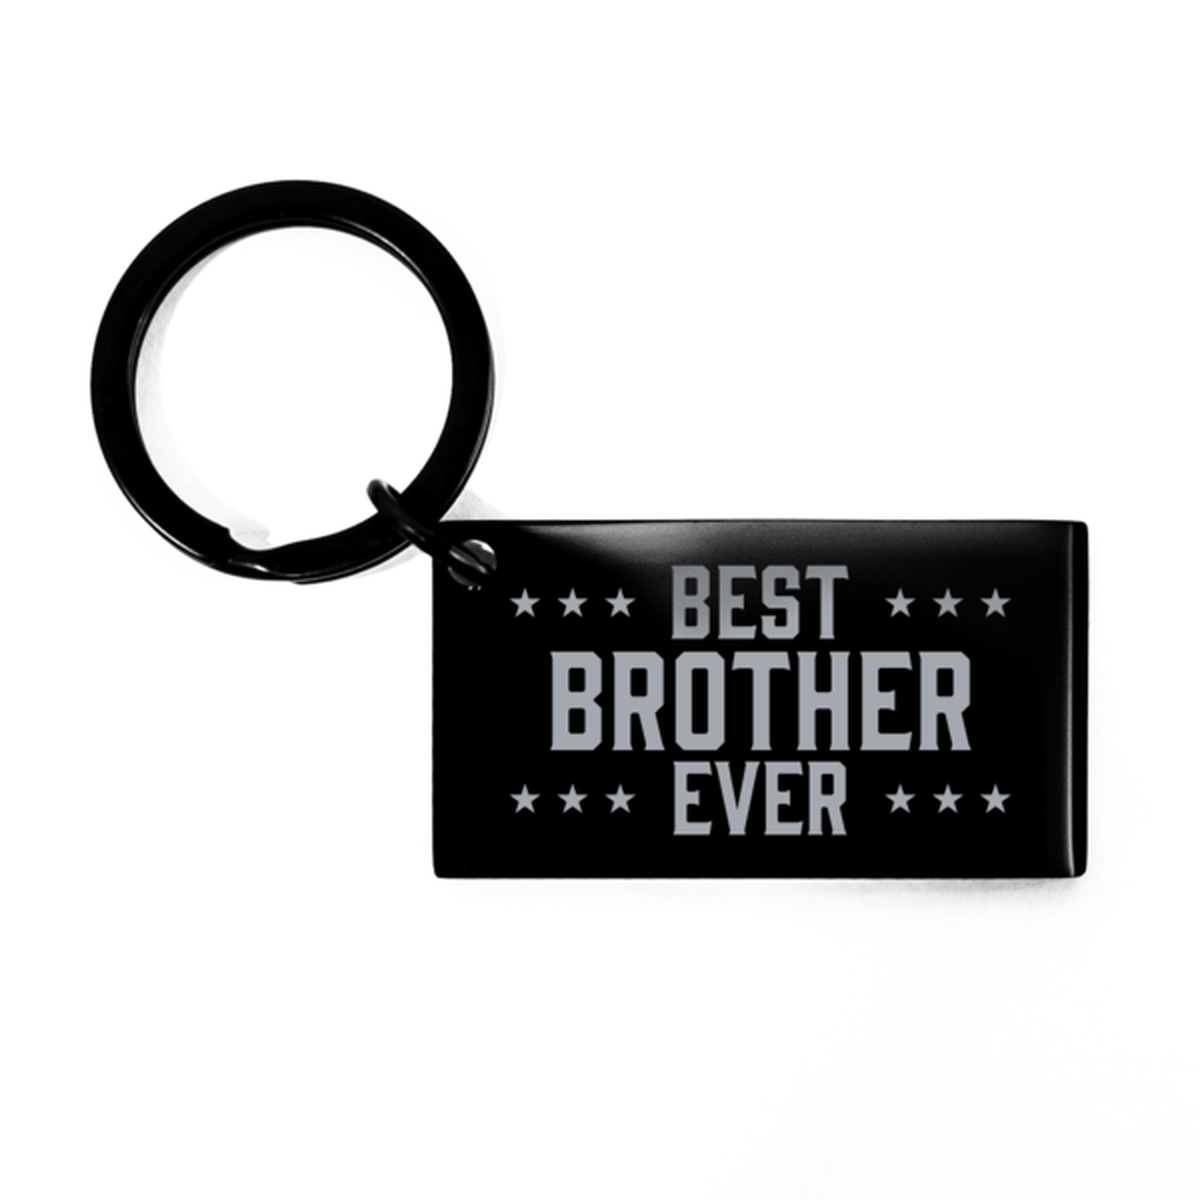 Best Brother Ever Brother Gifts, Funny Black Keychain For Brother, Birthday Engraved Keyring Presents For Men